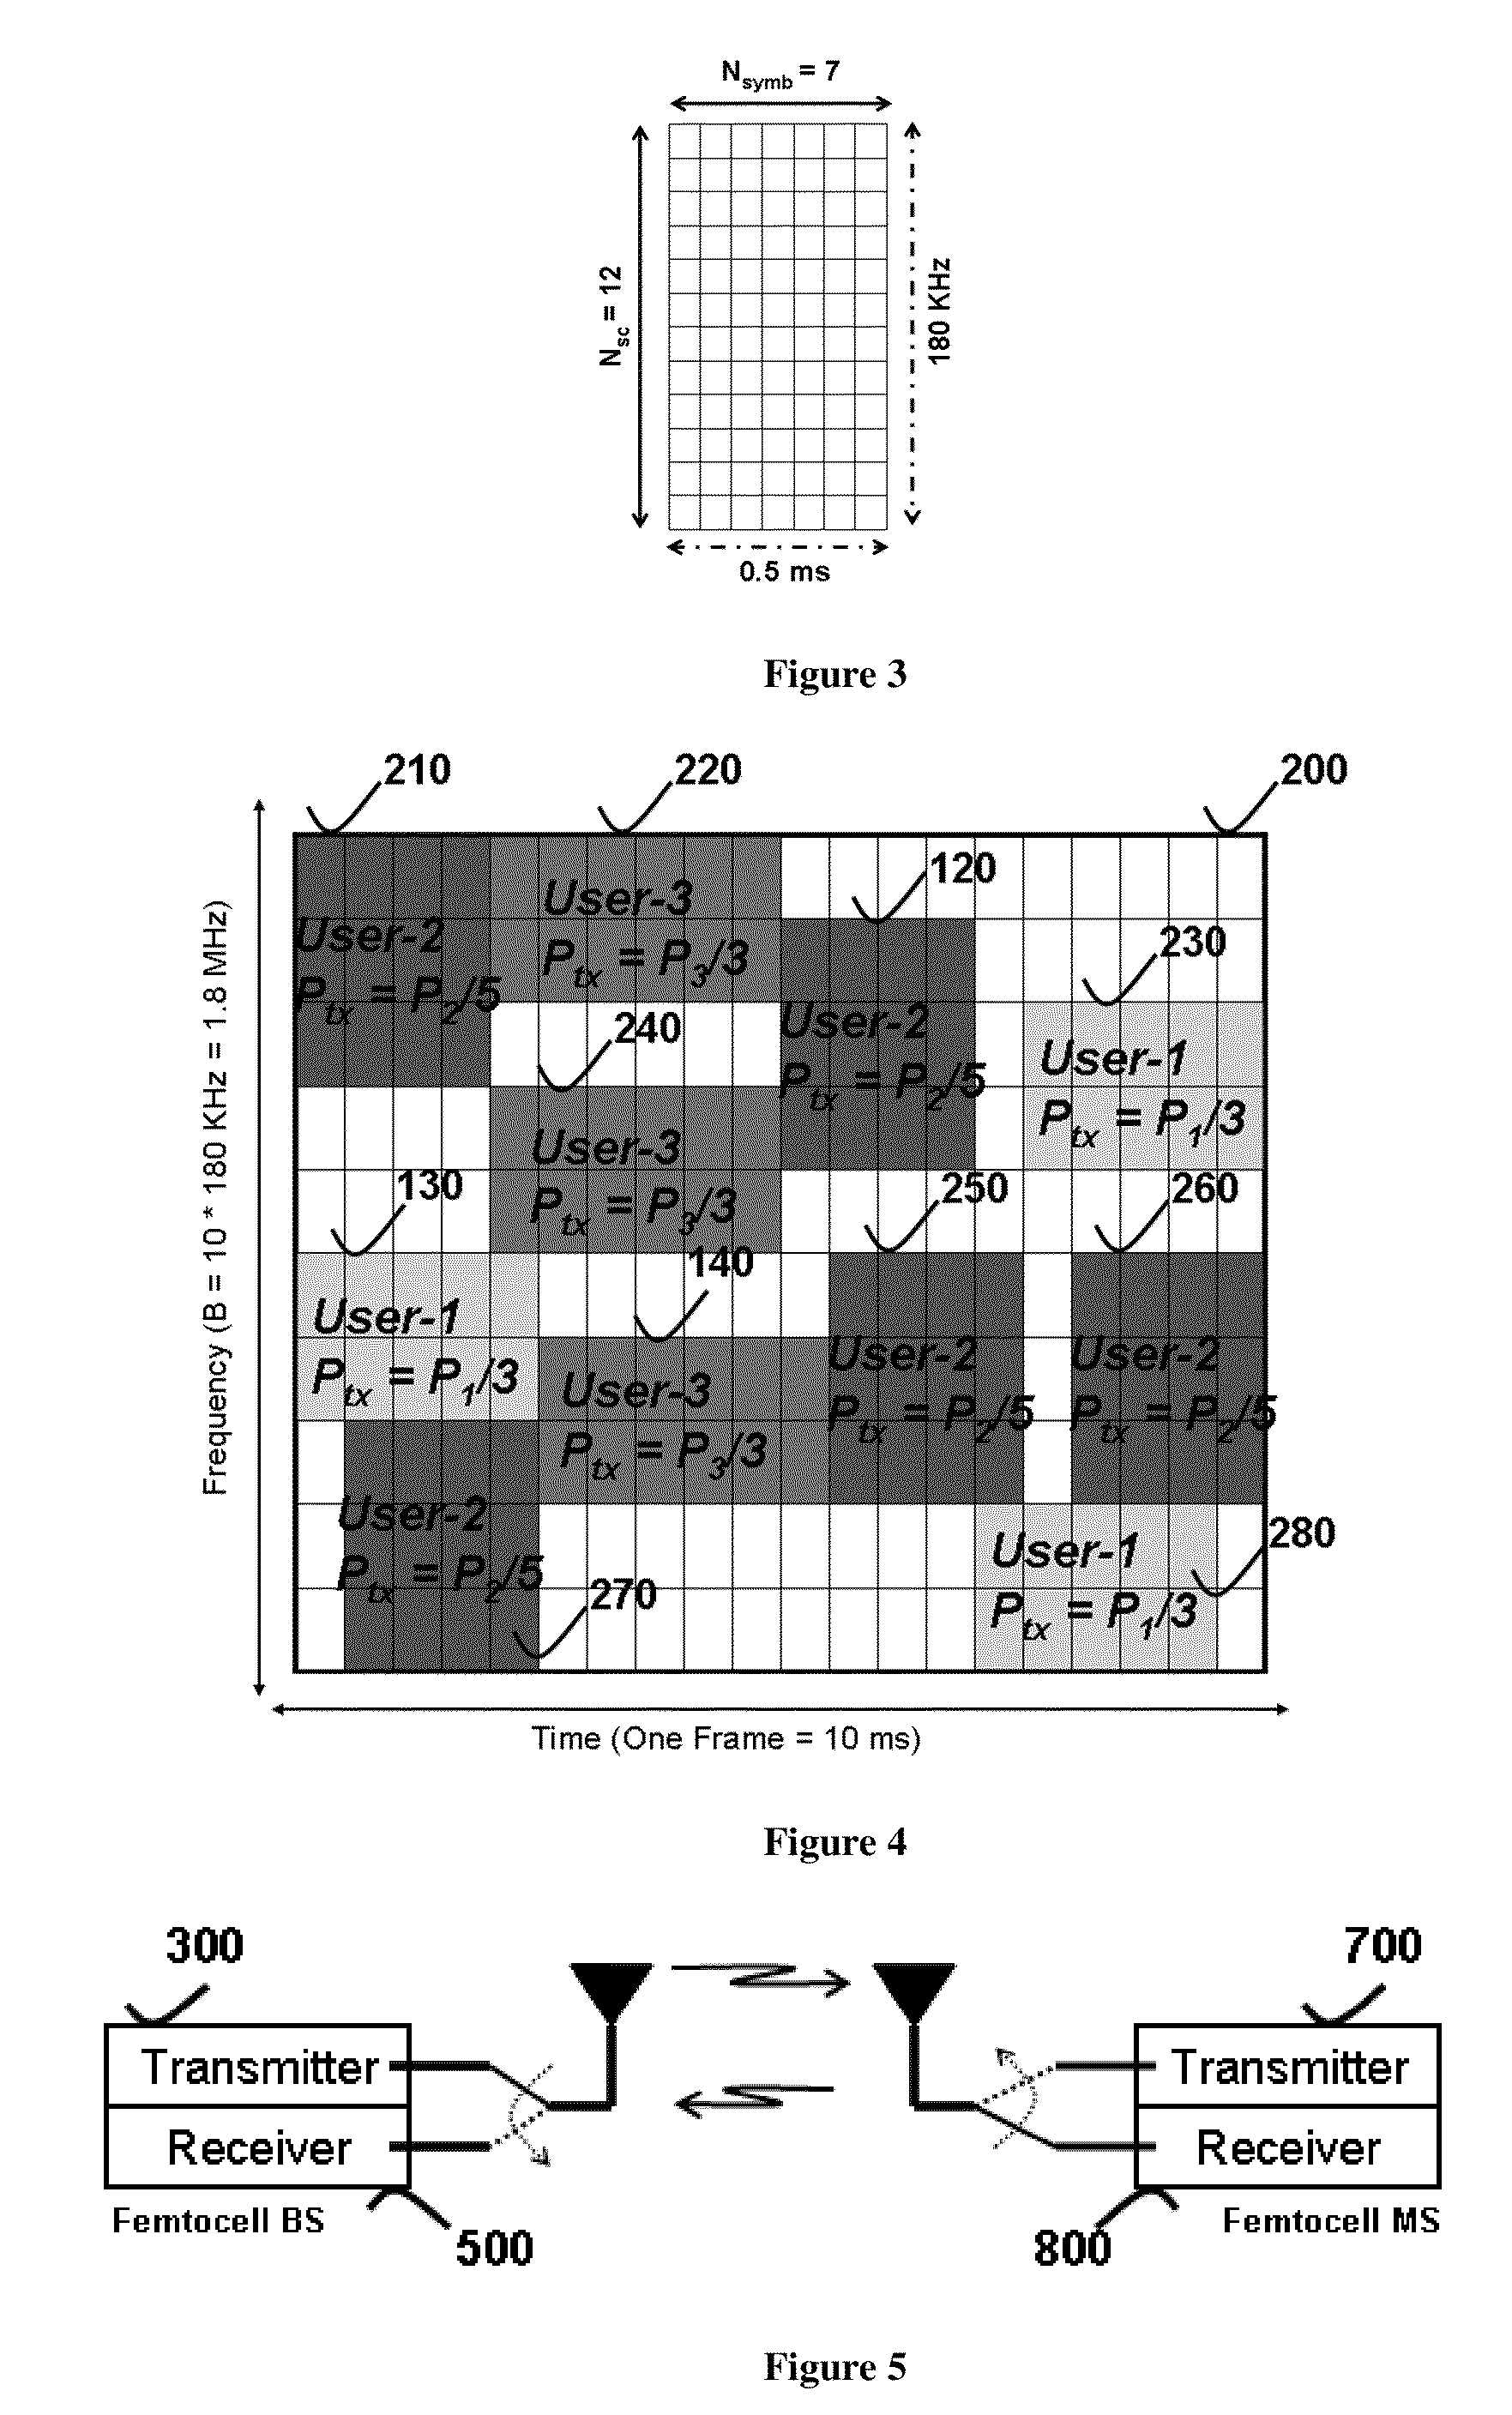 Method for Time Frequency Spreading in a Femtocell Network for Interference Reduction